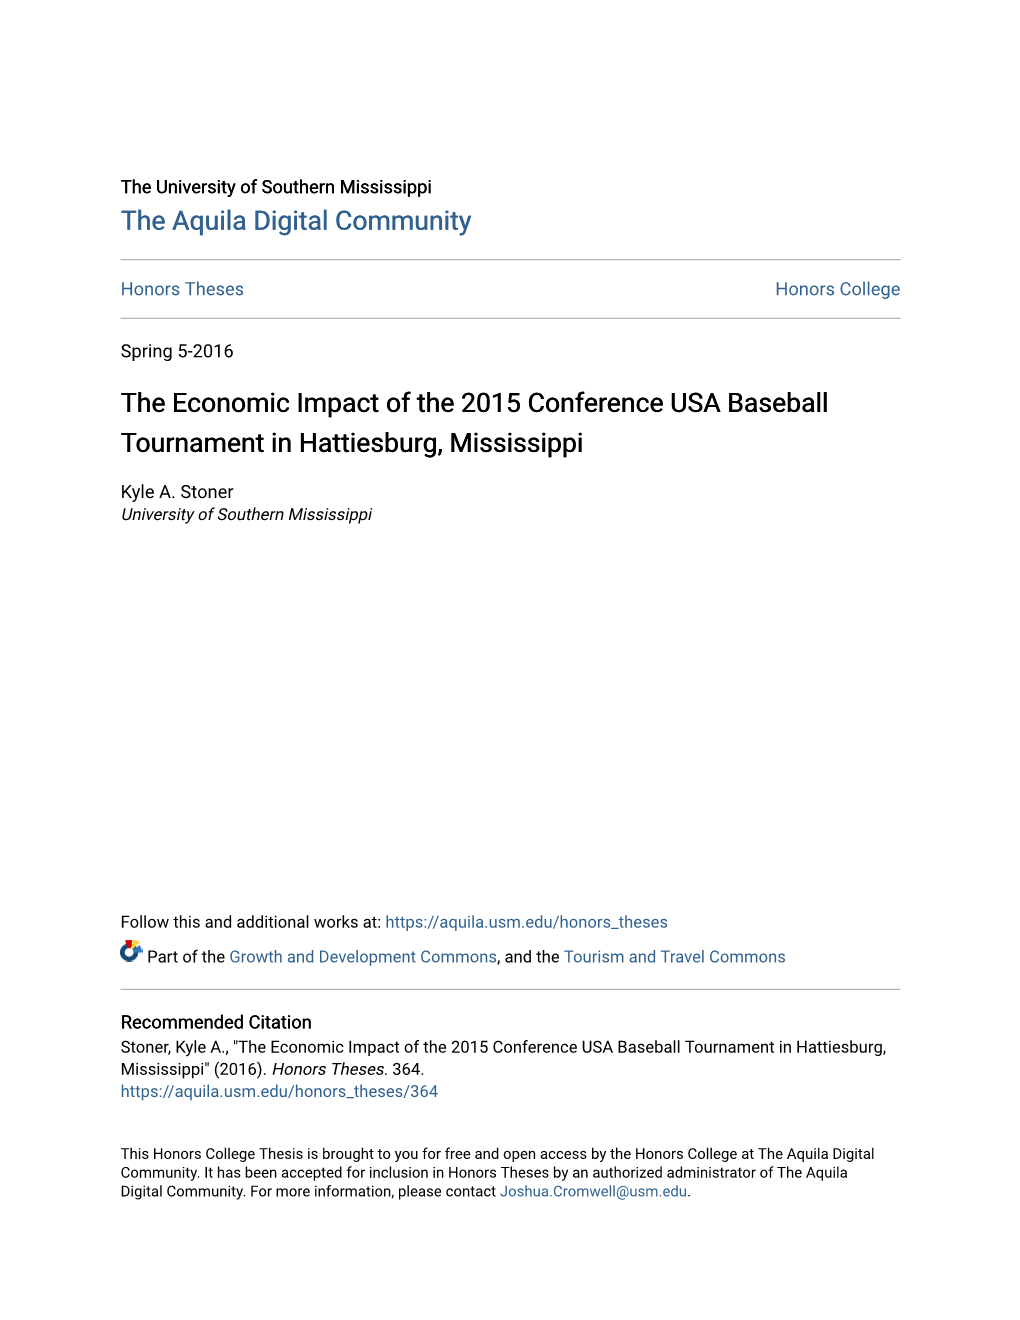 The Economic Impact of the 2015 Conference USA Baseball Tournament in Hattiesburg, Mississippi